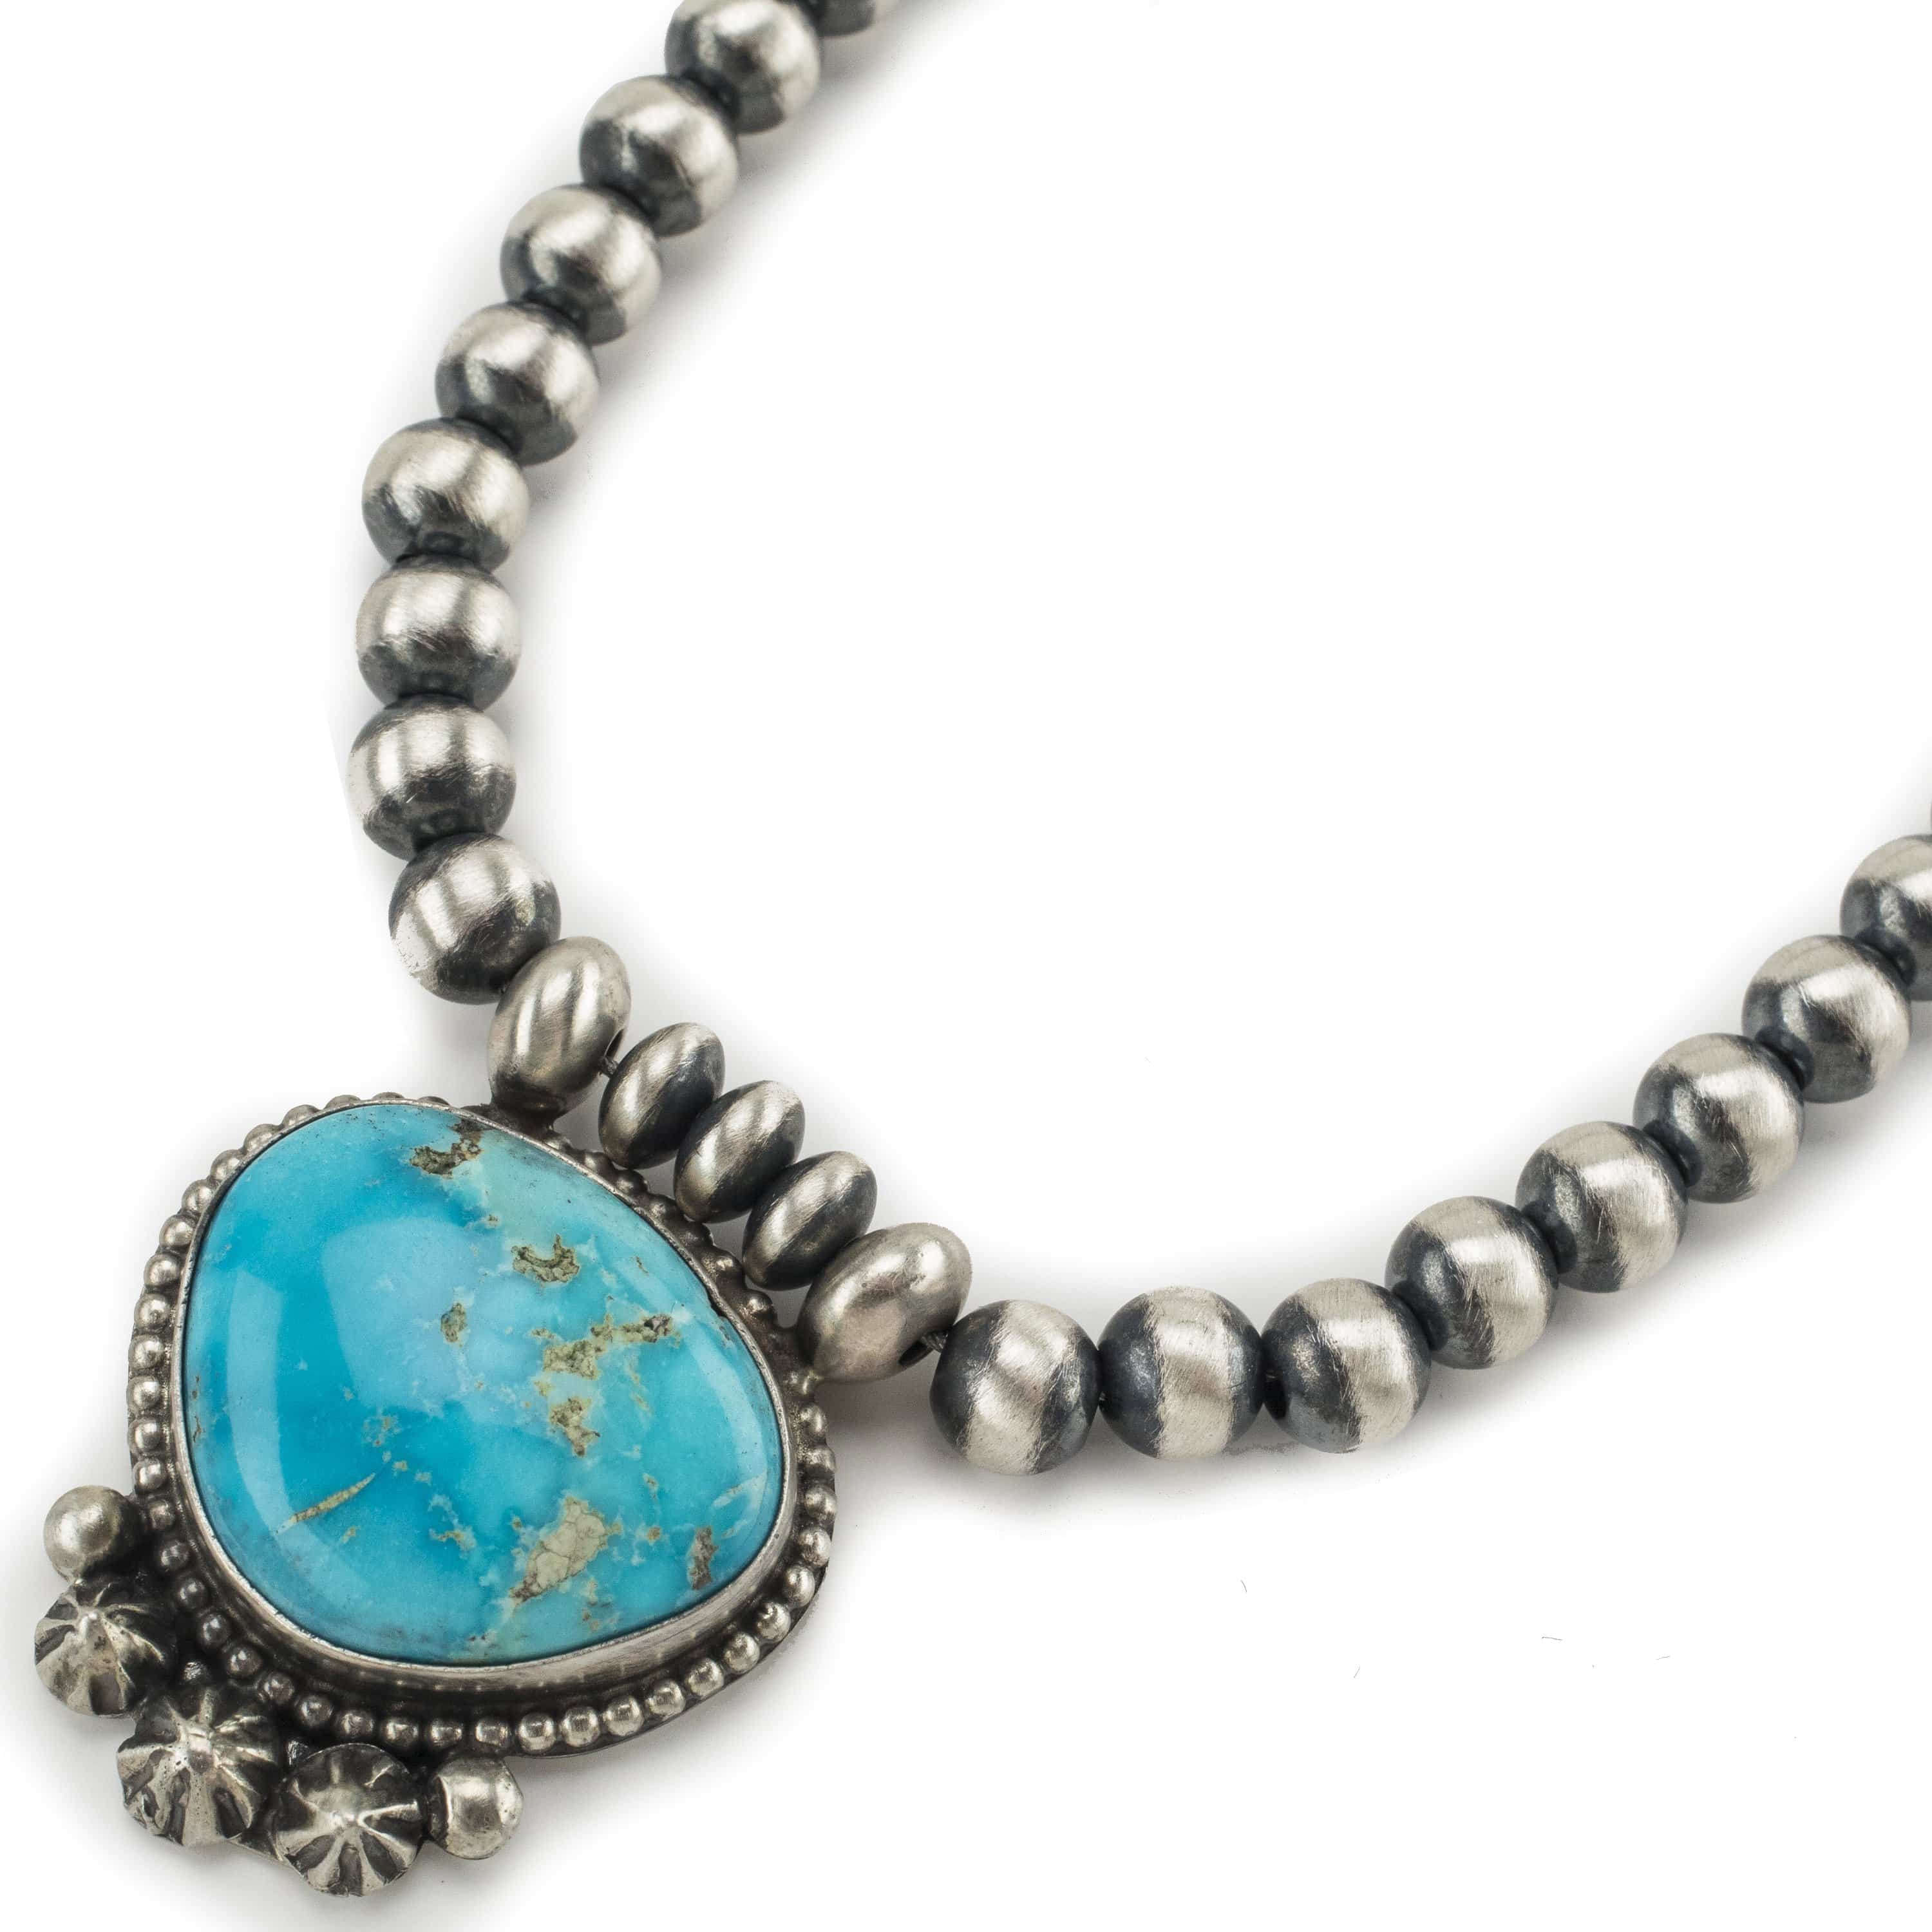 Kalifano Native American Jewelry Kee-J Sonoran Rose Turquoise Pendant and Attached Navajo Pearl USA Native American Made 925 Sterling Silver Necklace NAN1300.003